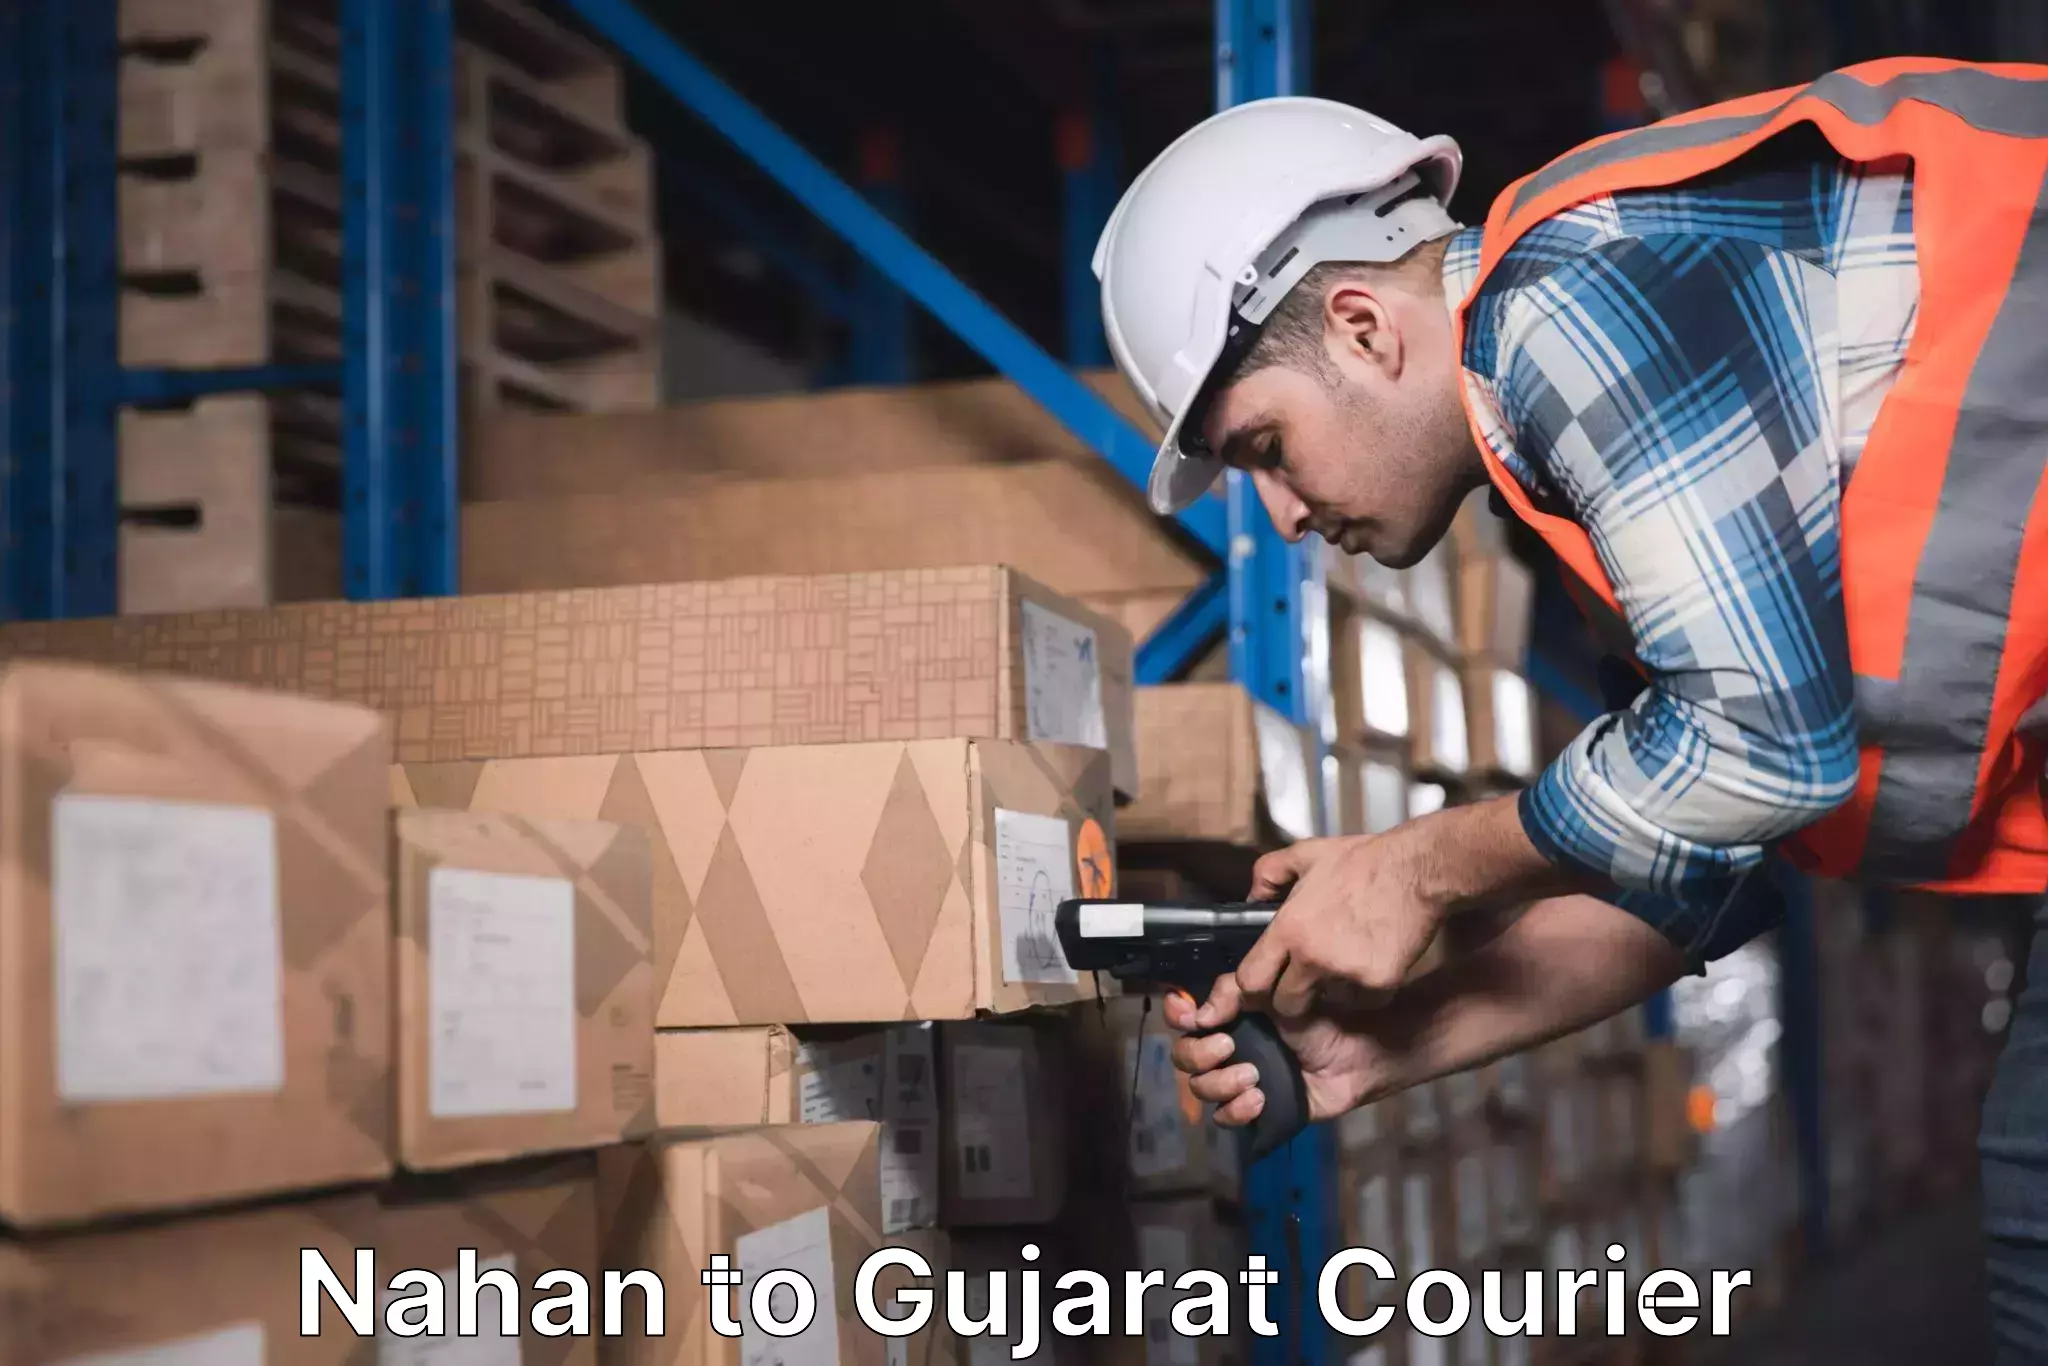 Courier app Nahan to Ahmedabad